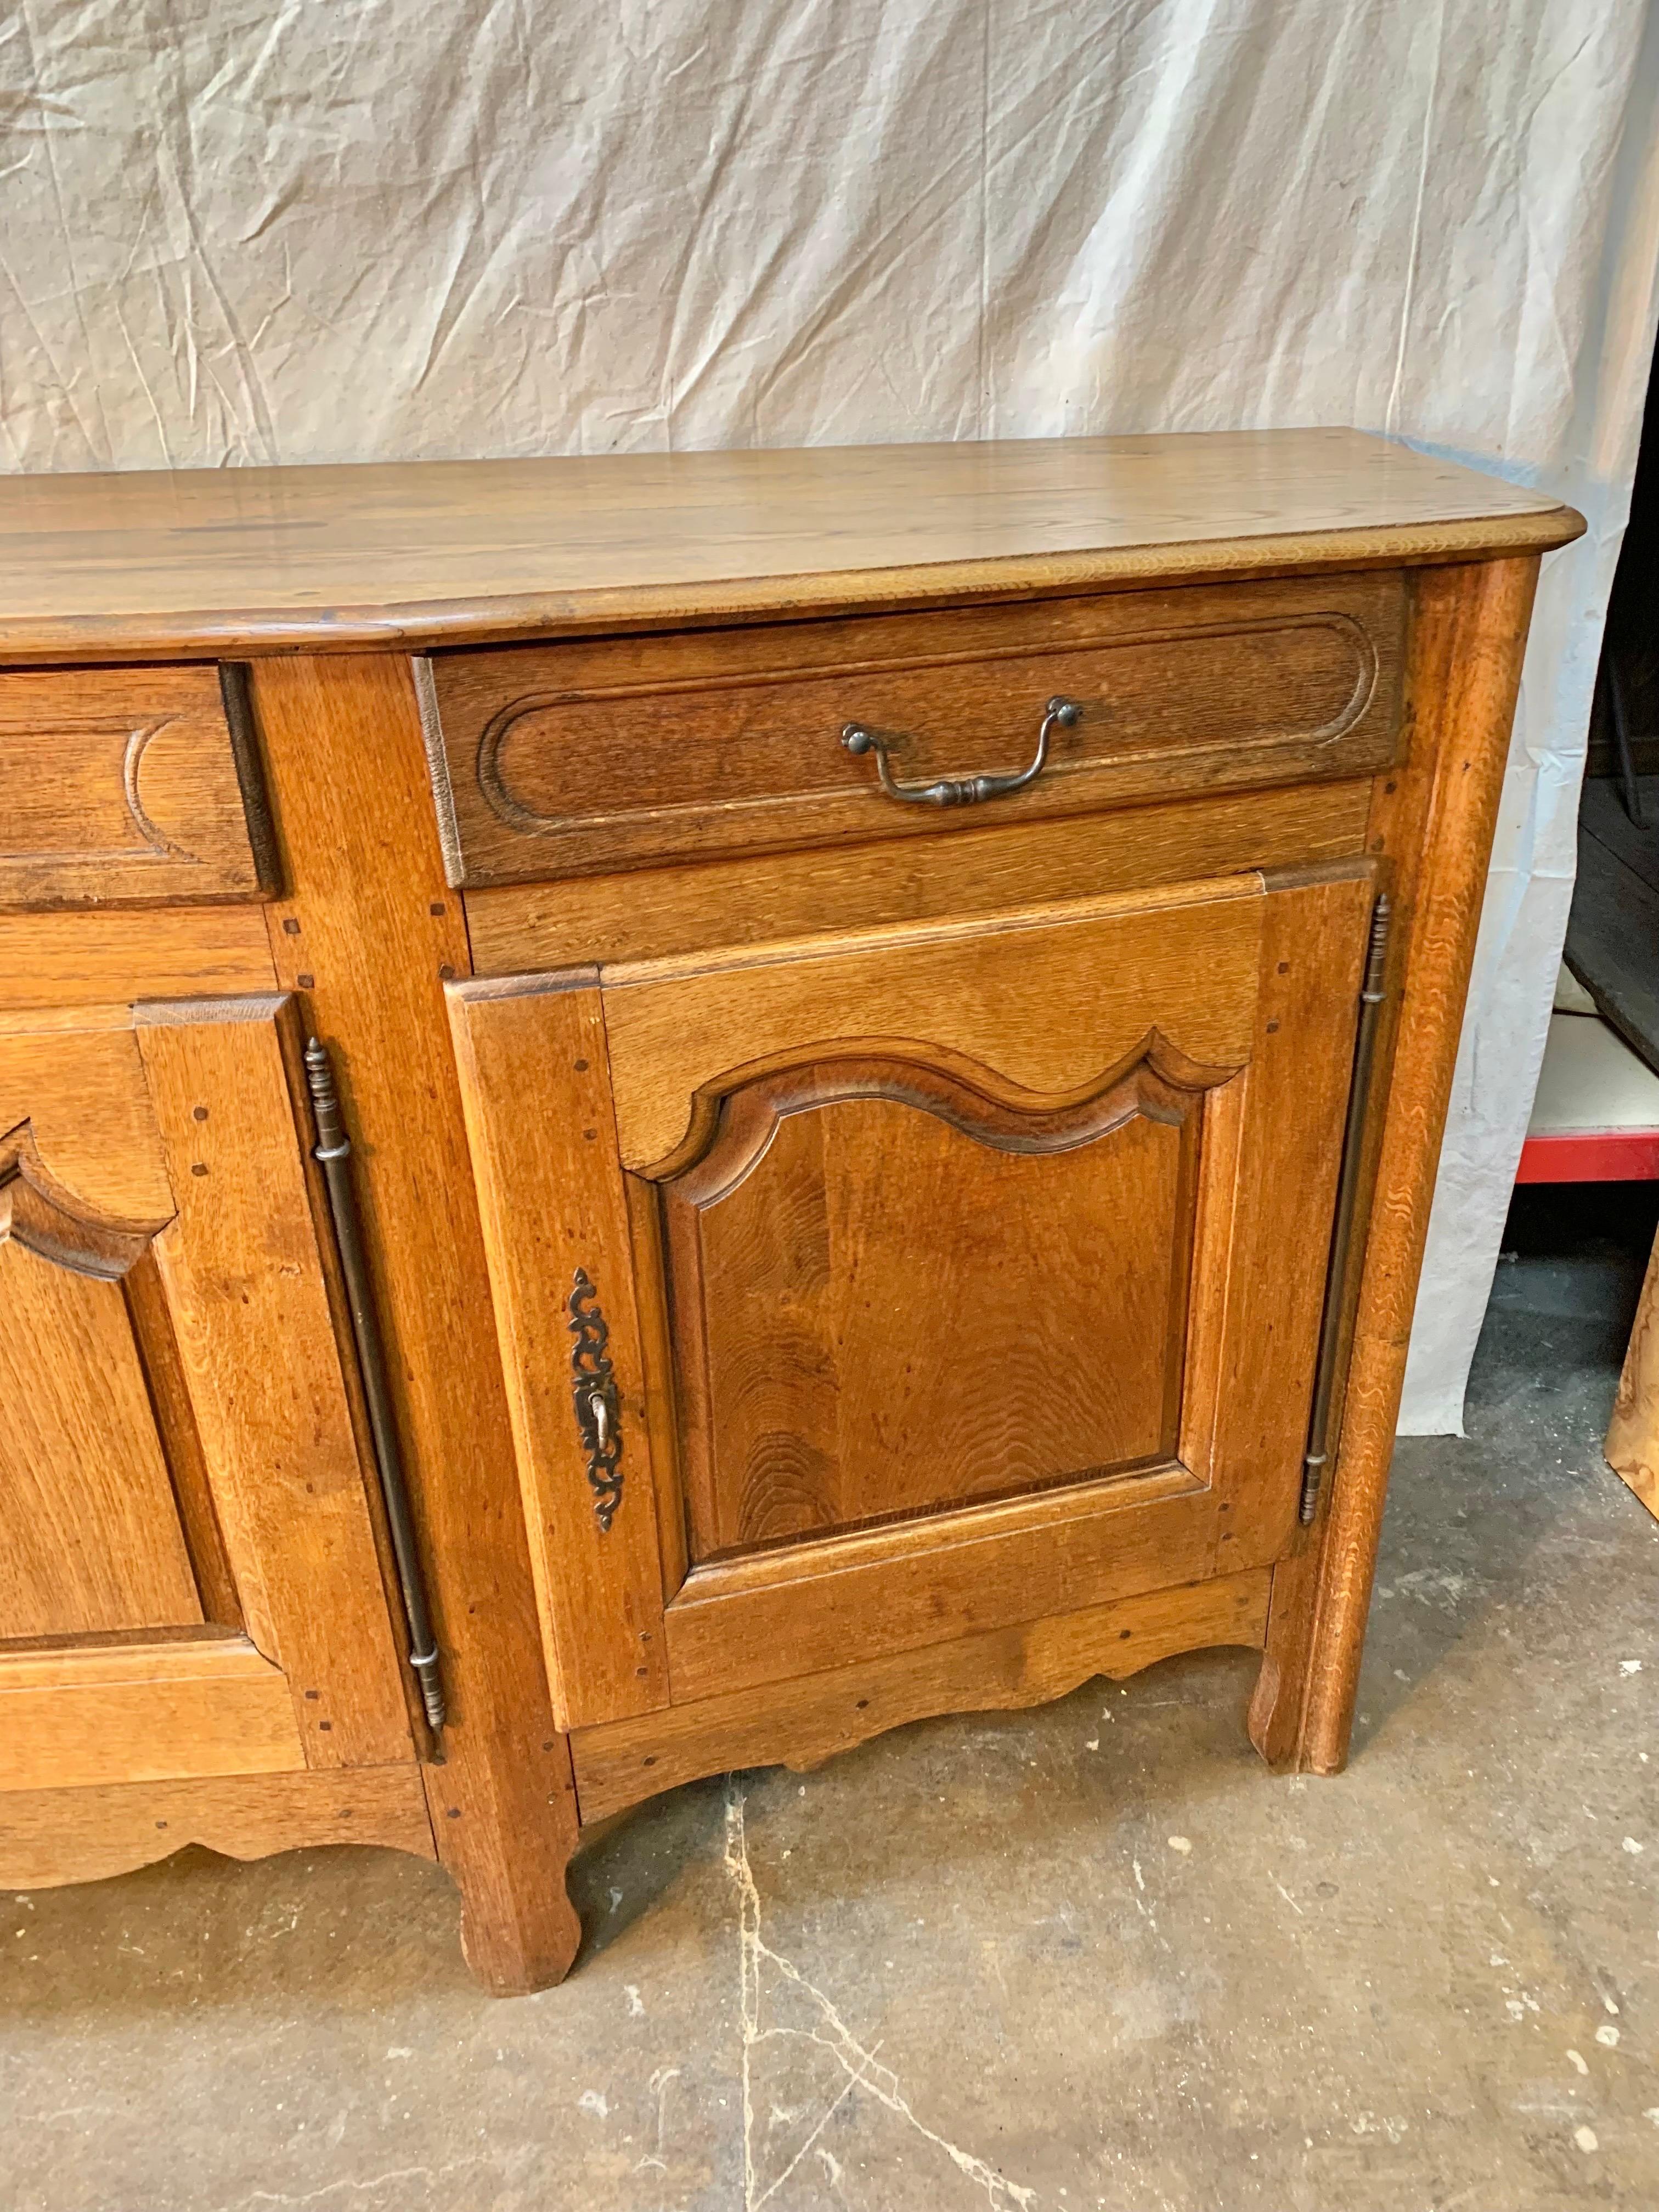 Early 1900s French Provincial Oak Buffet Sideboard In Good Condition For Sale In Burton, TX